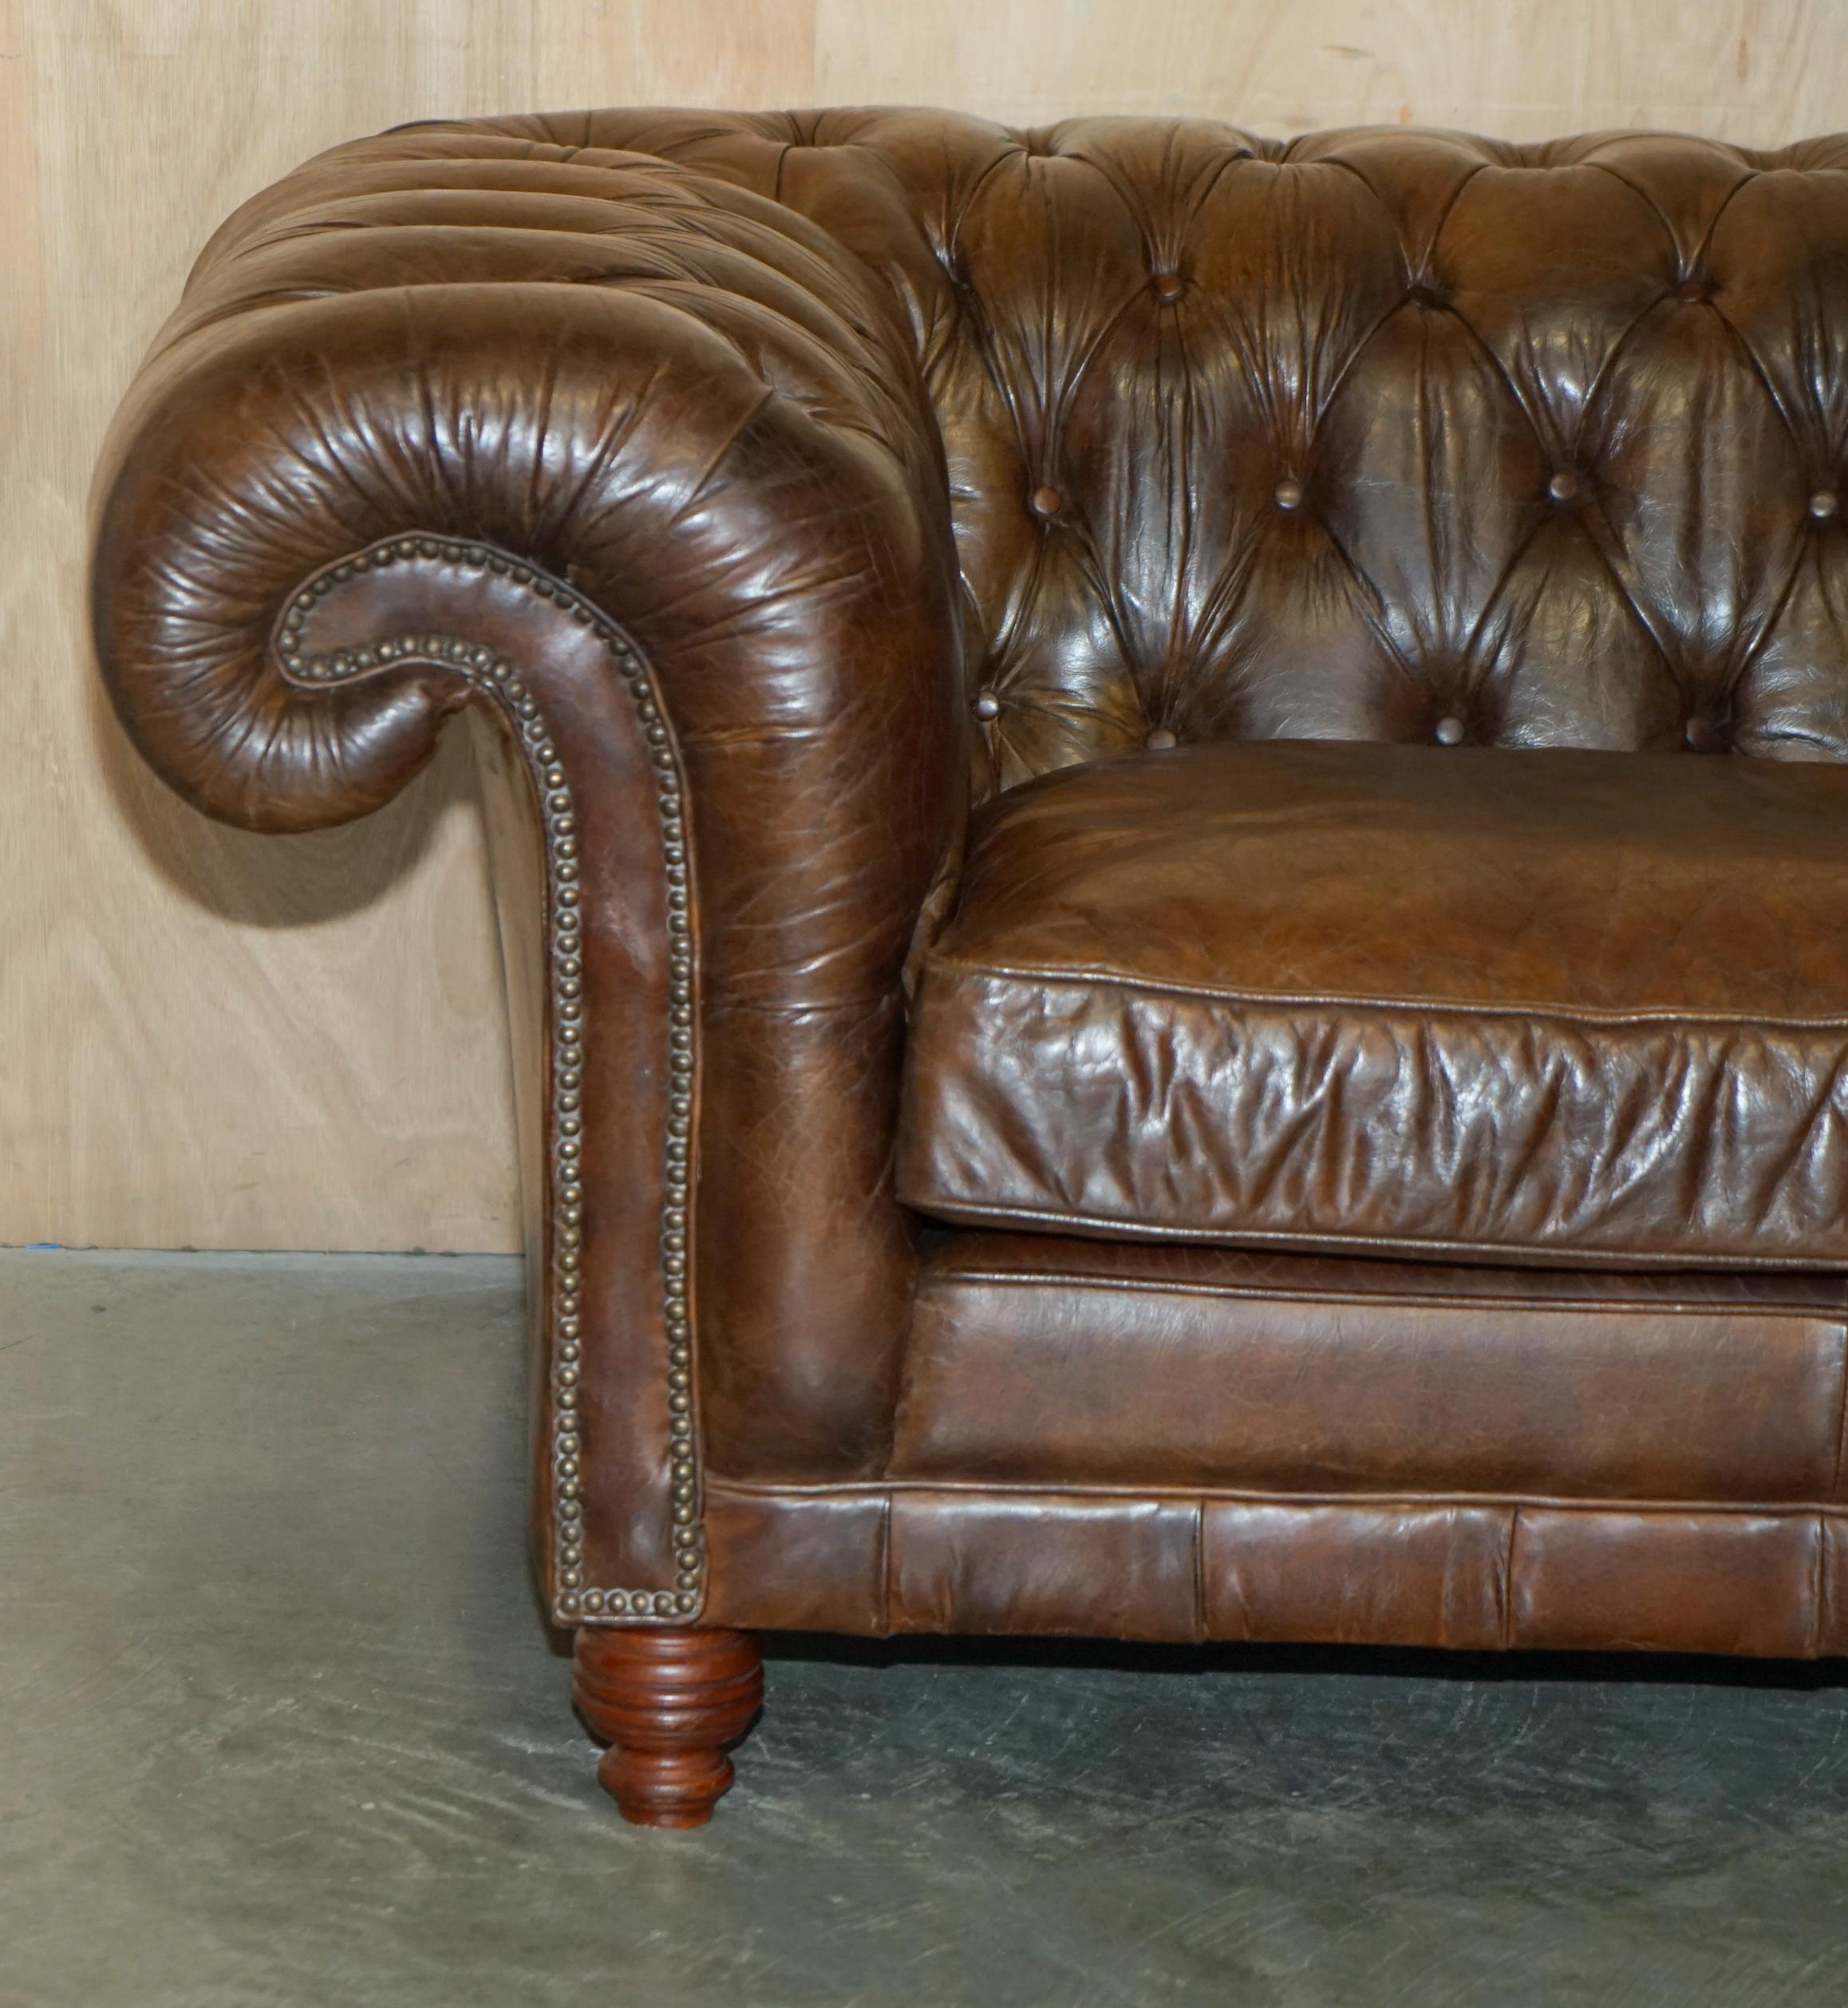 Chesterfield 1 DE 2 SOFAS TIMOTHY OULTON HERITAGE BROWN OVERSIZED LEATHER CHESTERFIELD HALO en vente